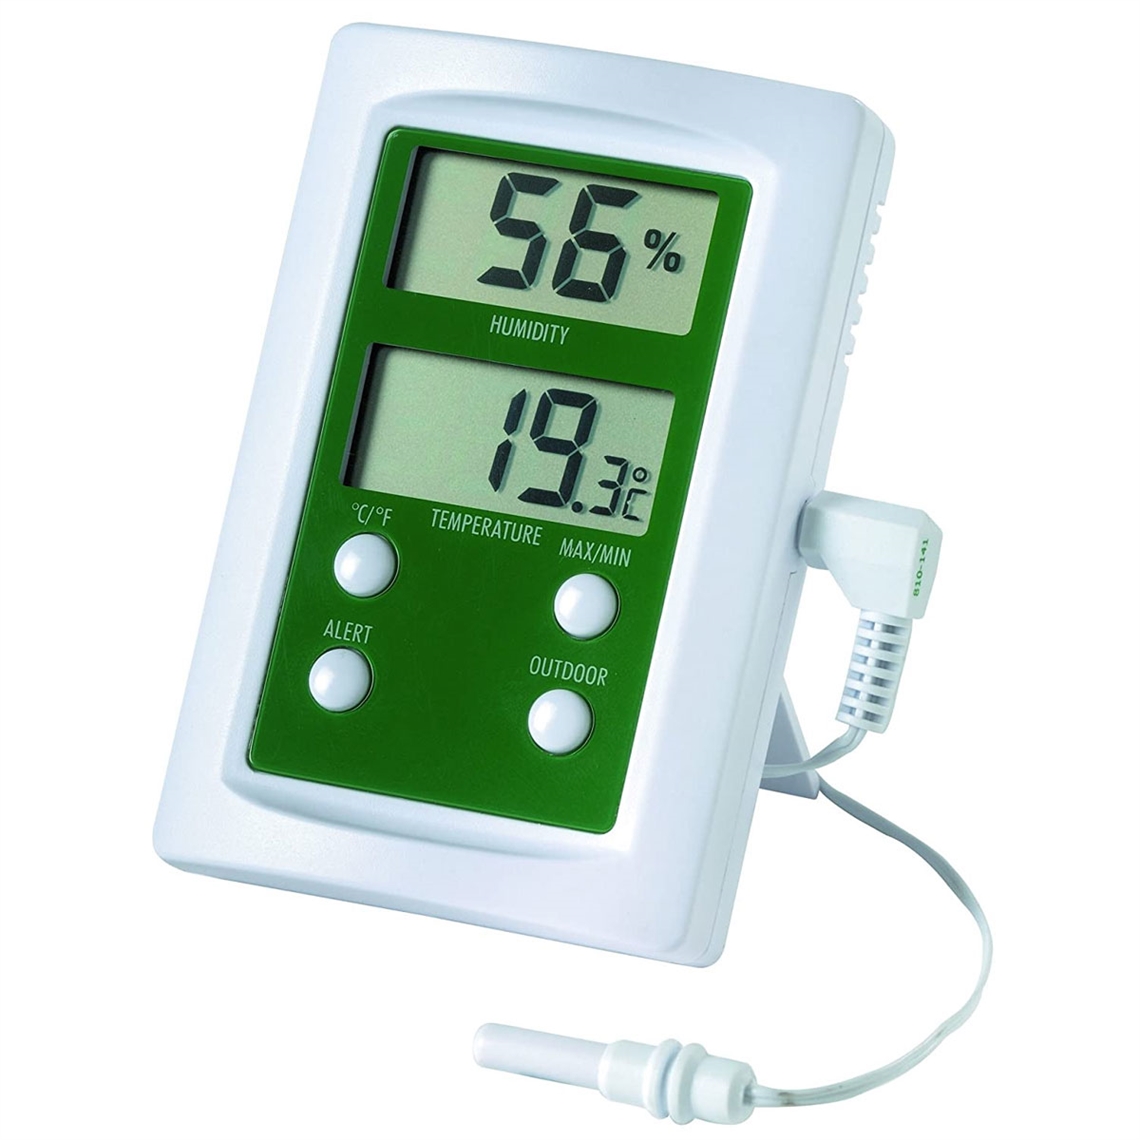 View more wineskin from our Thermo Hygrometers range